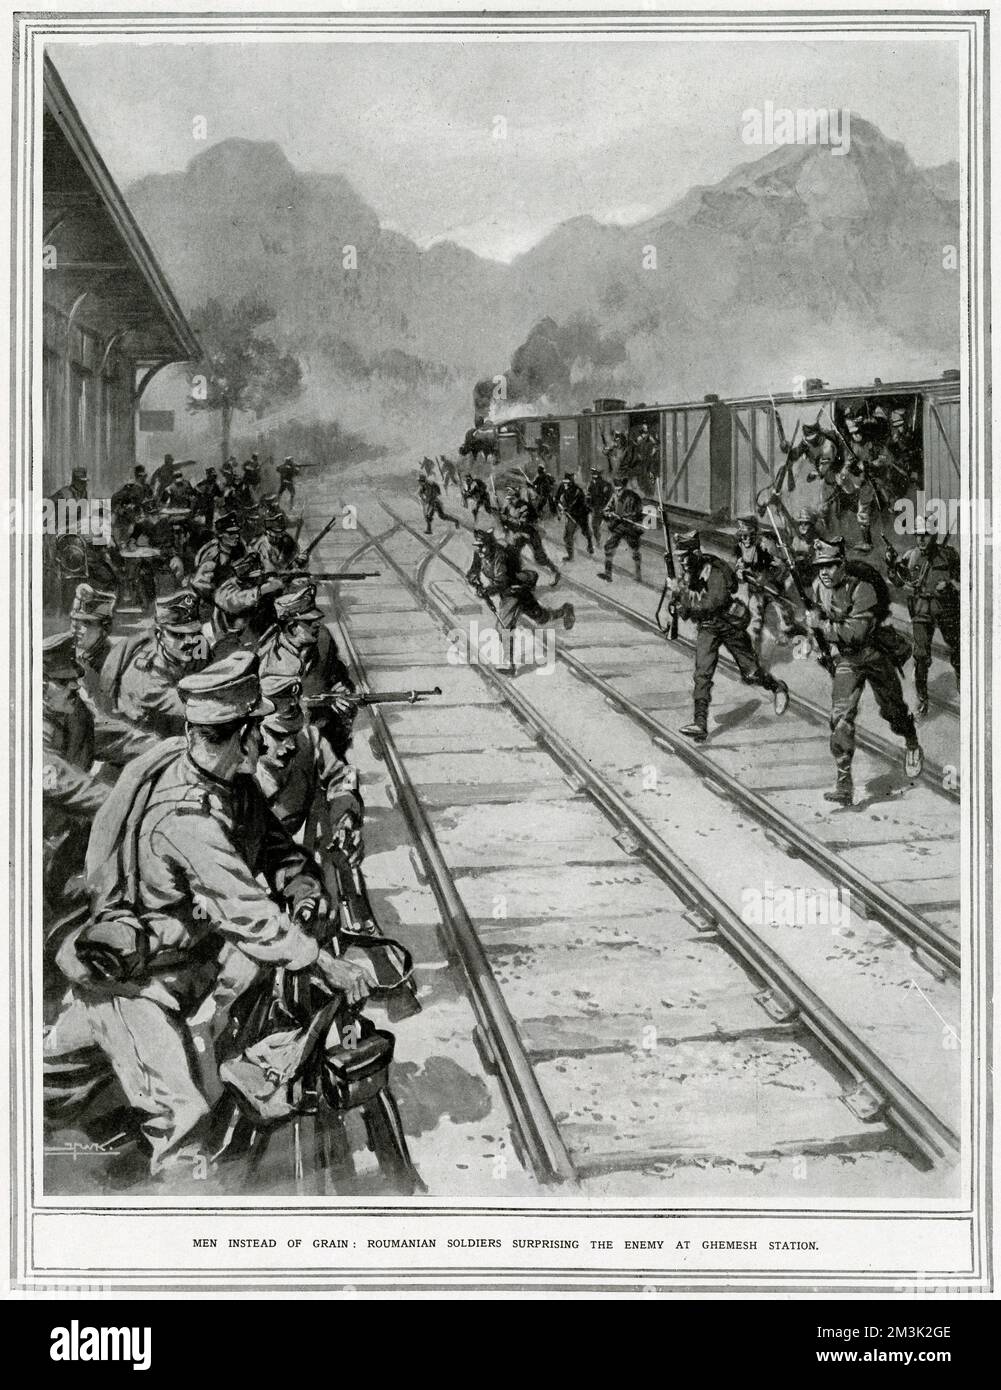 Surprise attack launched by Romanian troops on Ghemesh railway station in Austro-Hungaria, 1916. On the first day of hostilities between these two countries the Romanians asked that a Hungarian train might be fetched back from Romania. The Hungarians thought it would be full of grain and agreed, sending a steam engine to collect it. On its return to Austro-Hungaria the train stopped at Ghemesh station, only to reveal a large cargo of Romanian soldiers rather than grain - a modern day 'Trojan Horse'. Stock Photo